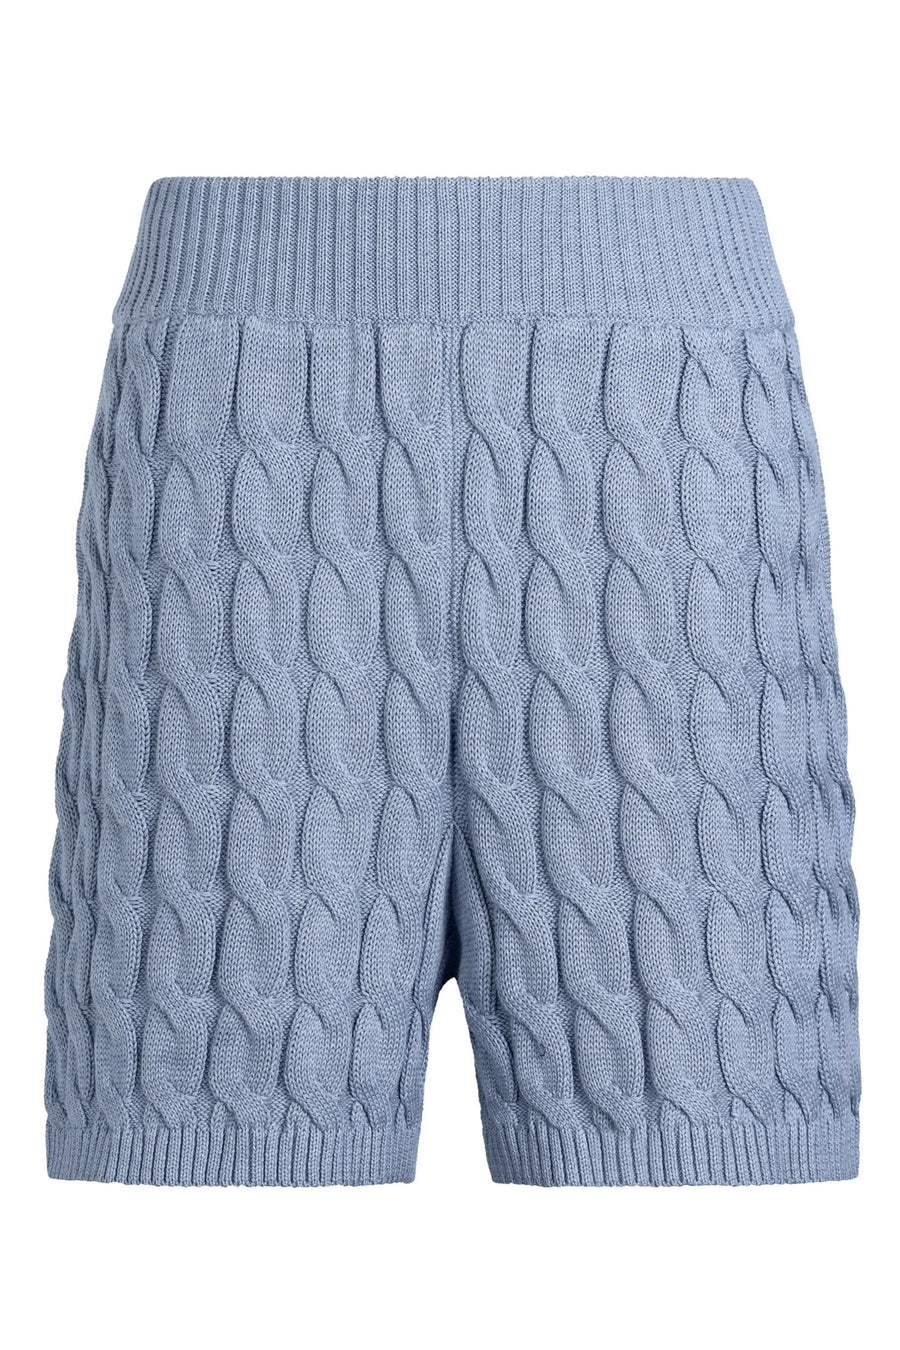 The Country Club Pima Shorts